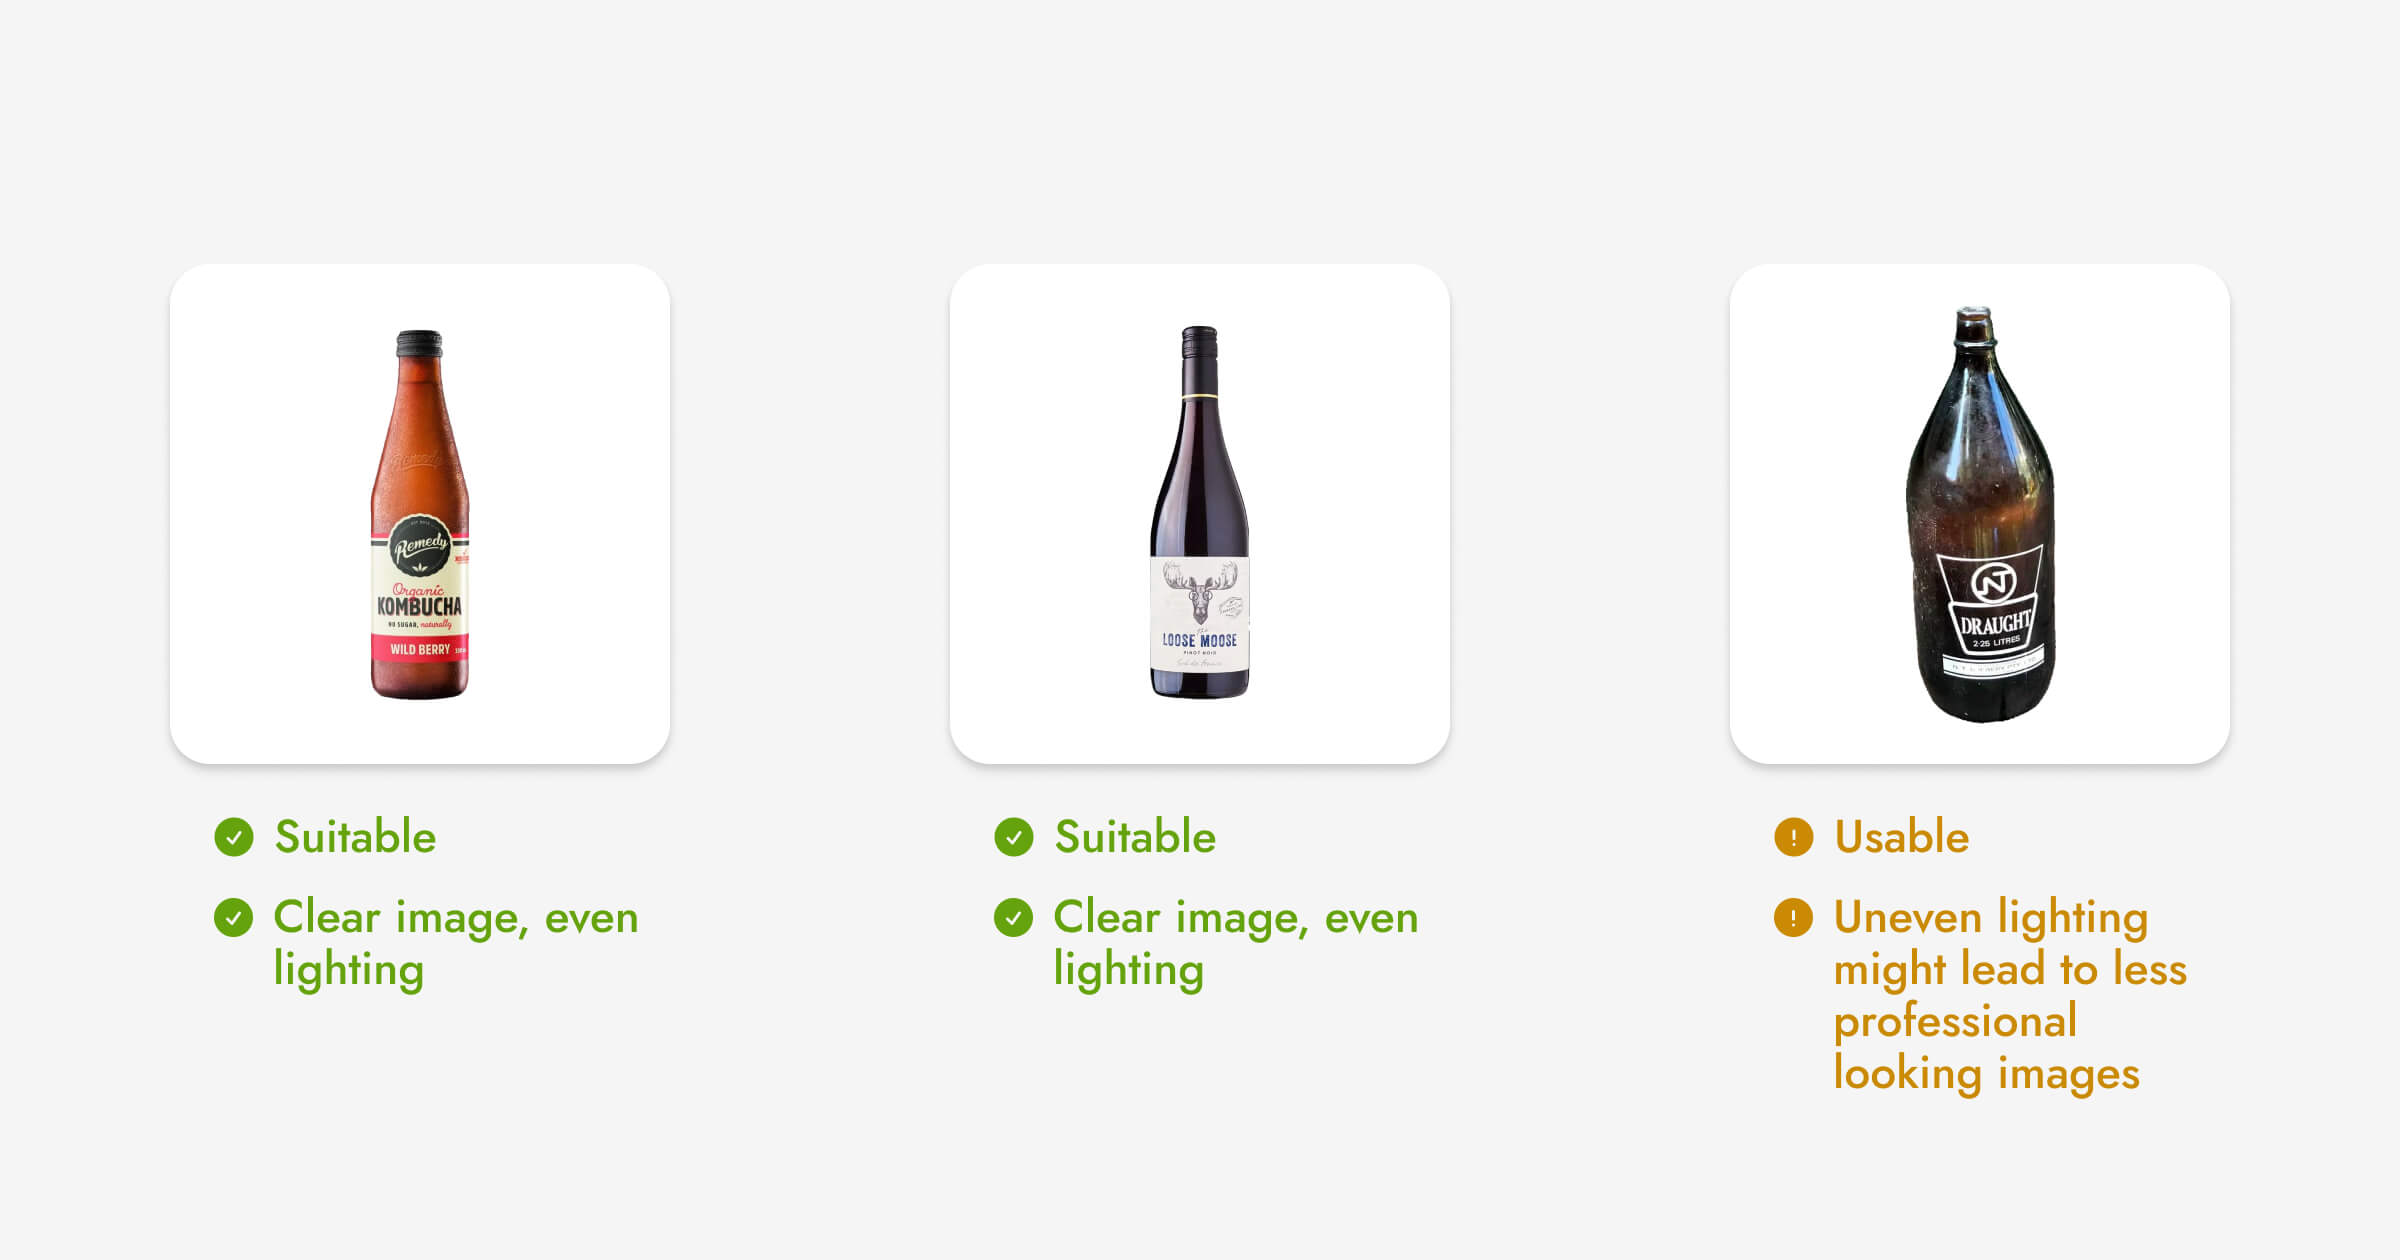 A visual of the best bottle photos to upload into Pebblely